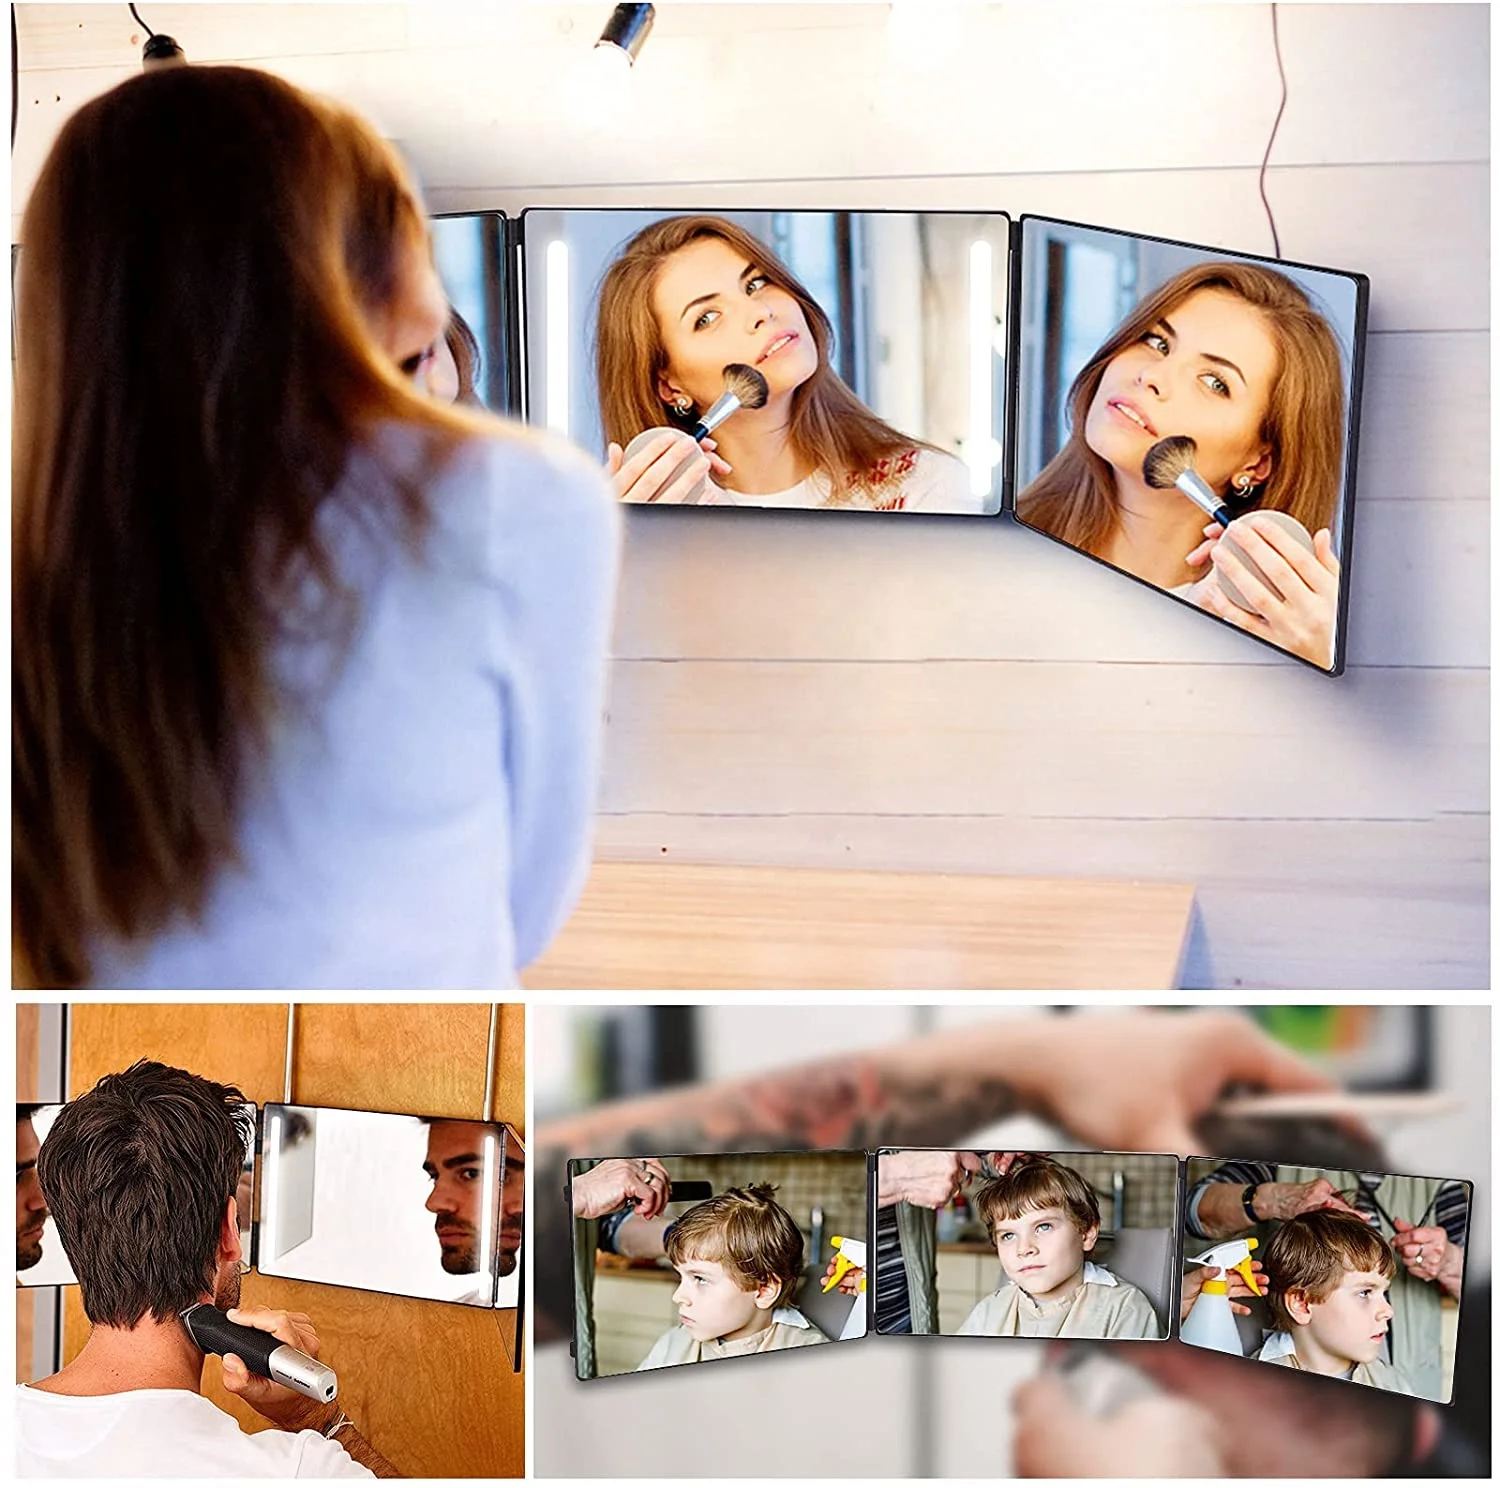 Biumart New Makeup Mirror Light DIY Haircut Tool Trifold Mirror for Self Hair Cutting and Styling